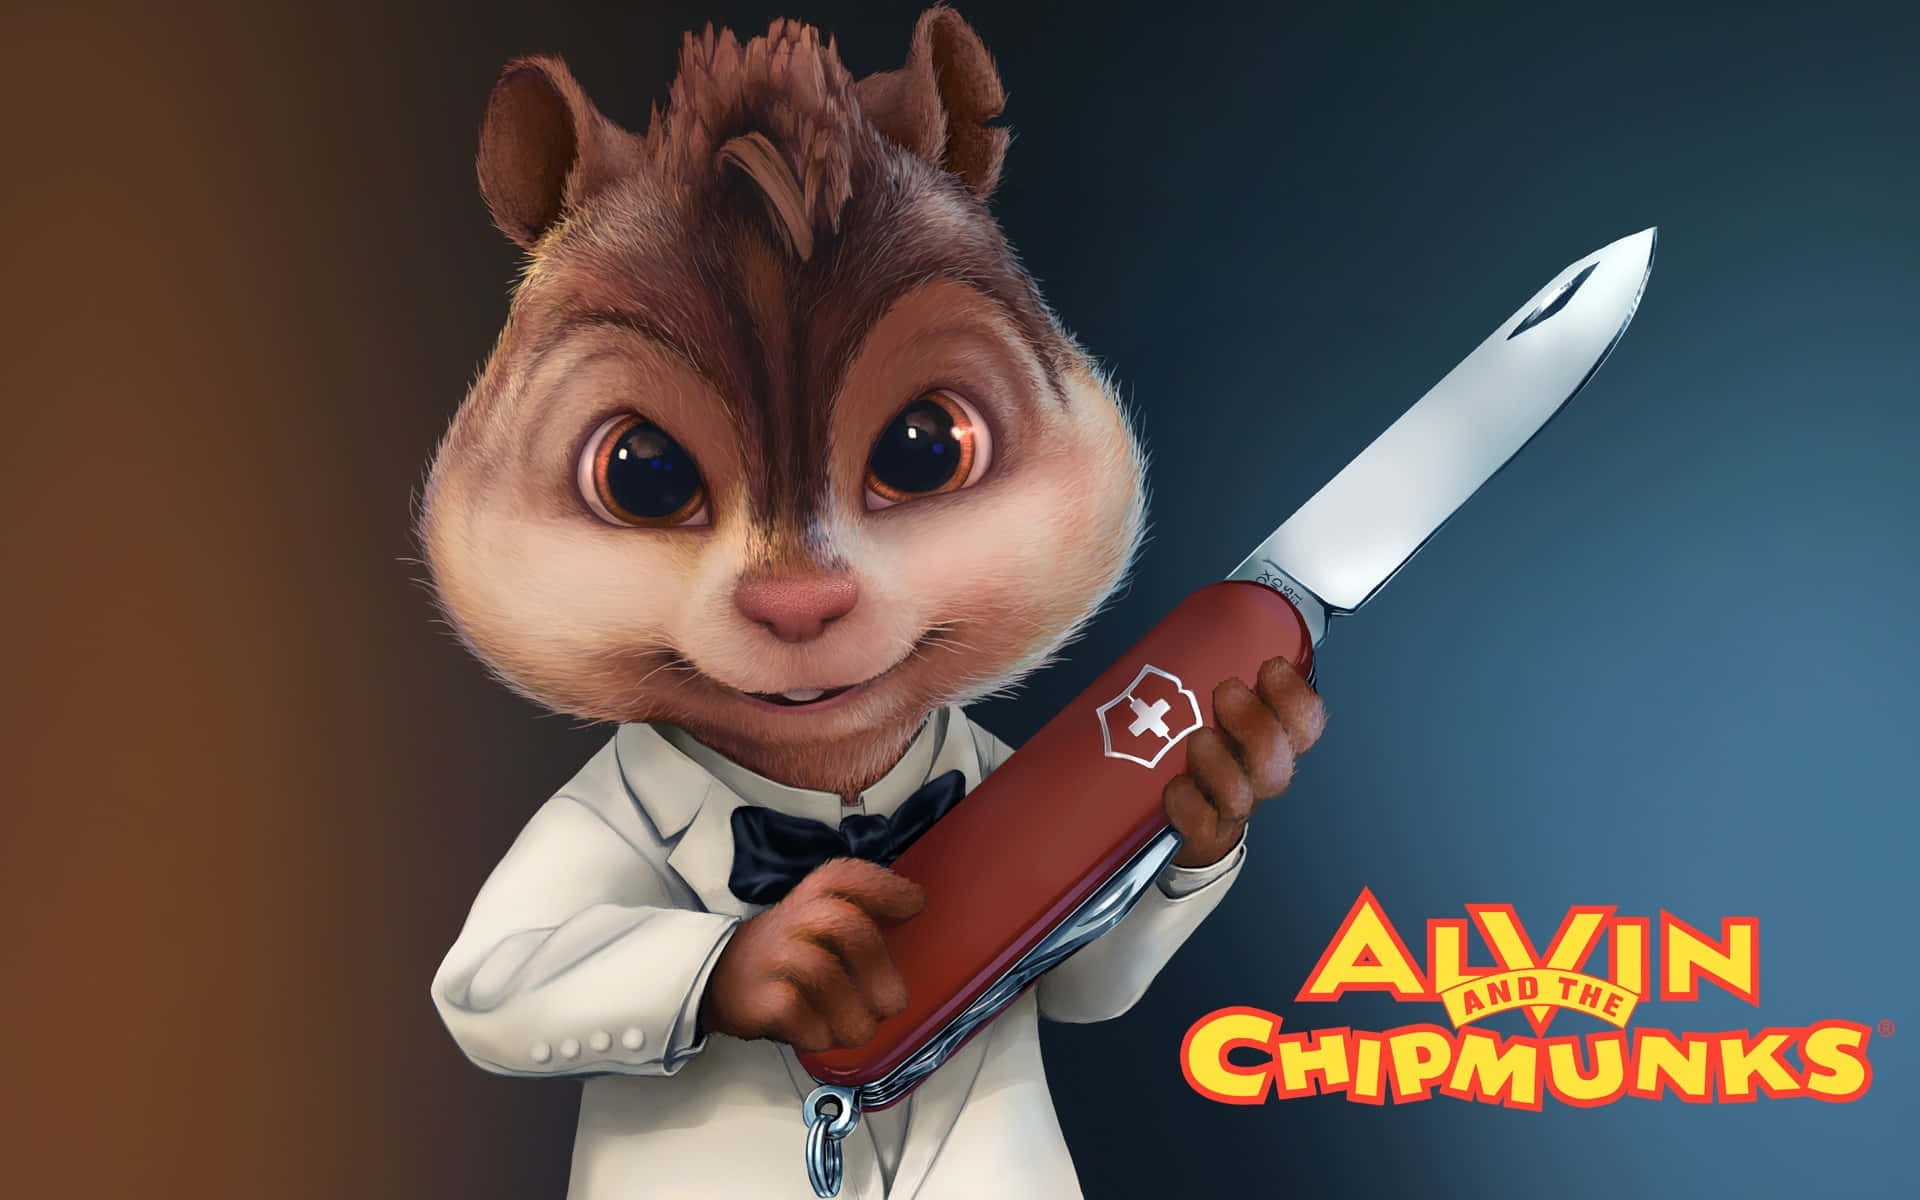 Sing and Dance with Alvin and The Chipmunks!